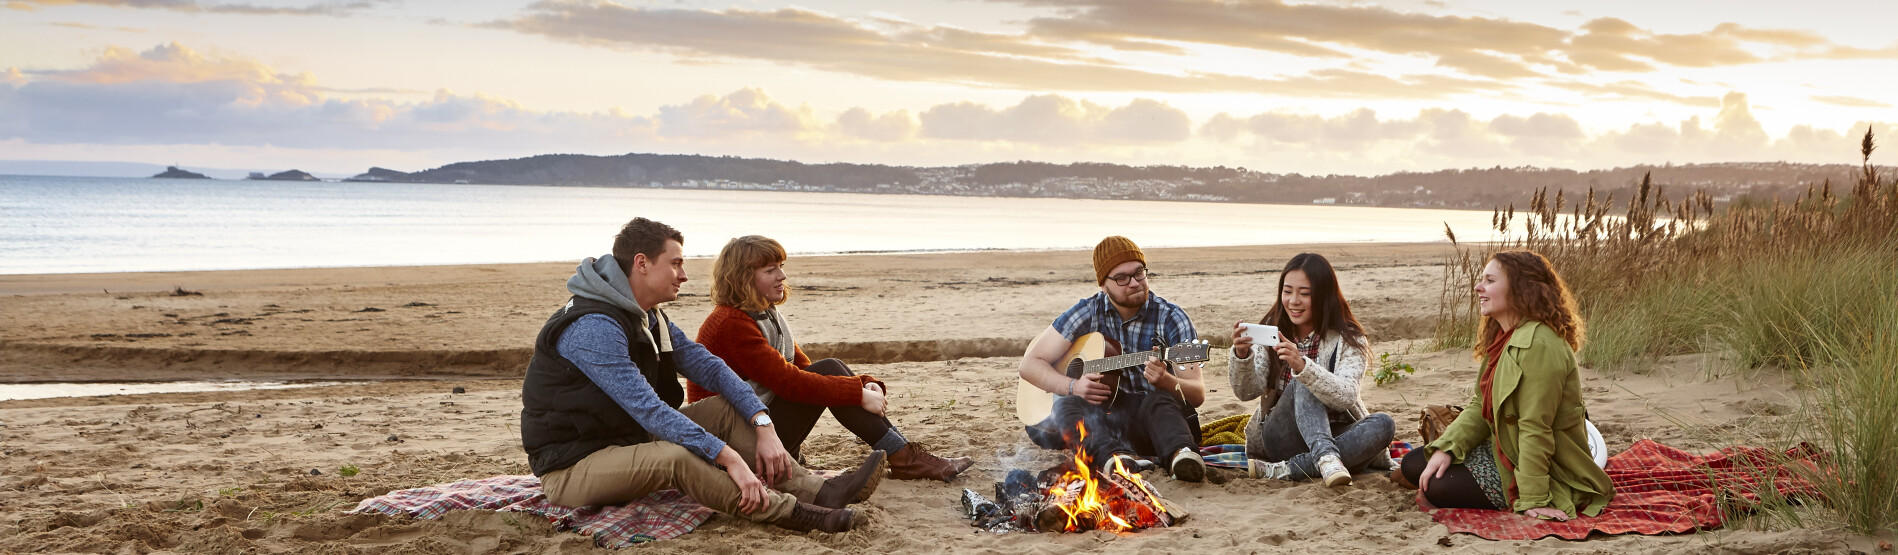 Students playing guitar around a campfire on the beach.